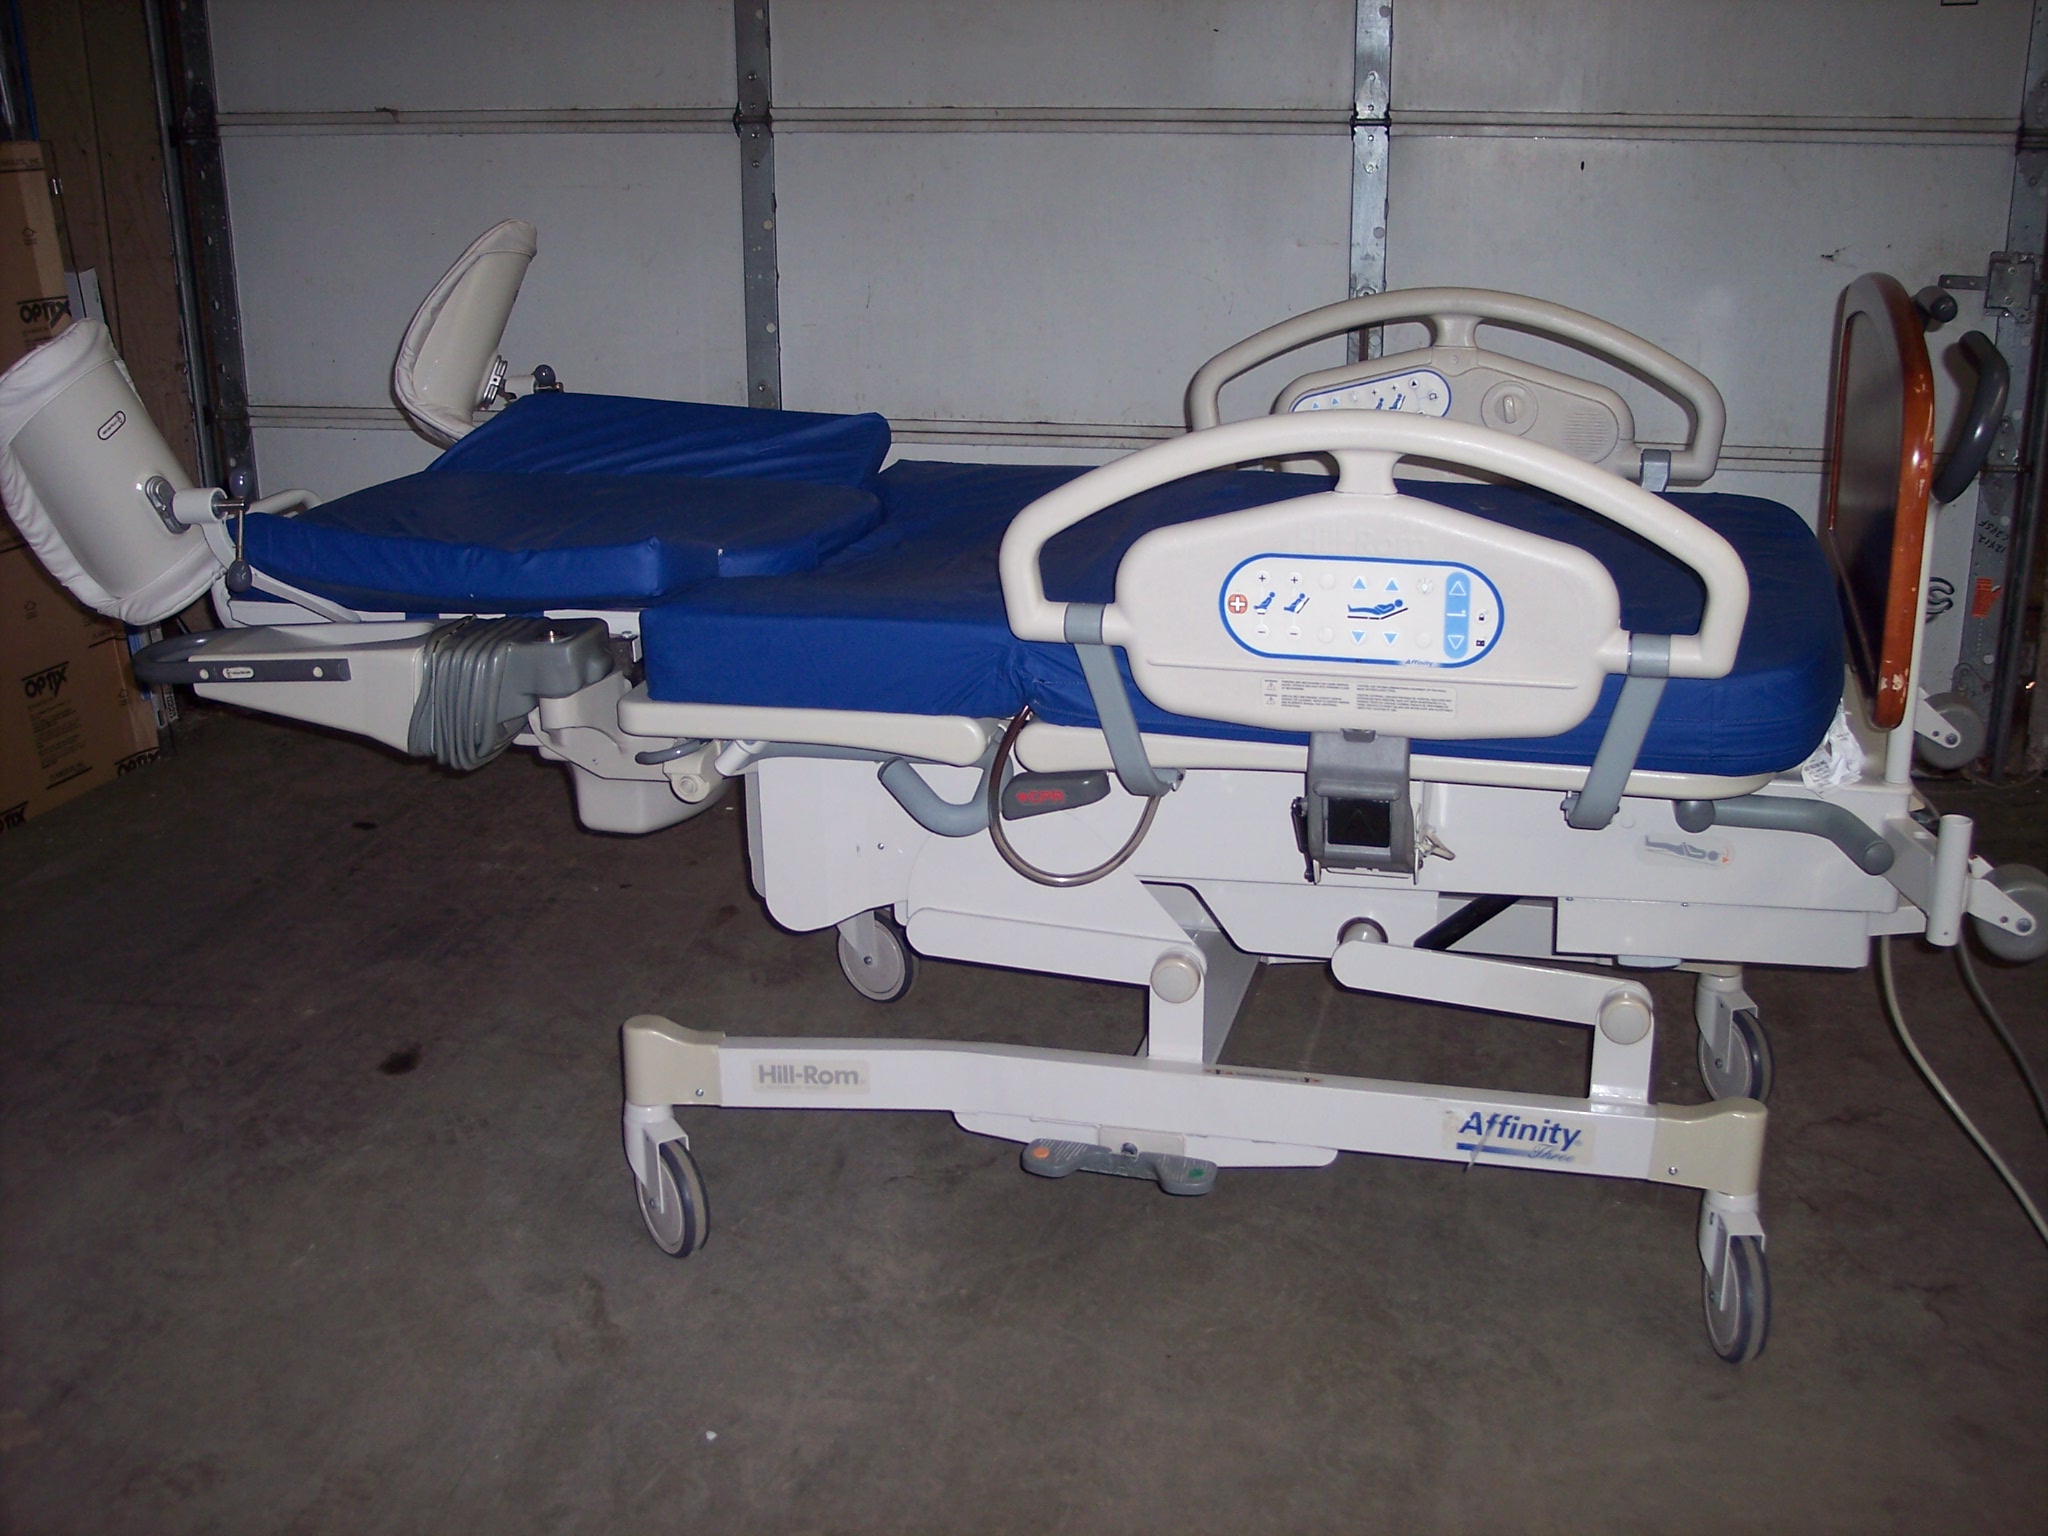 Hill-Rom Affinity III P3700 Child Bearing / Birthing Bed